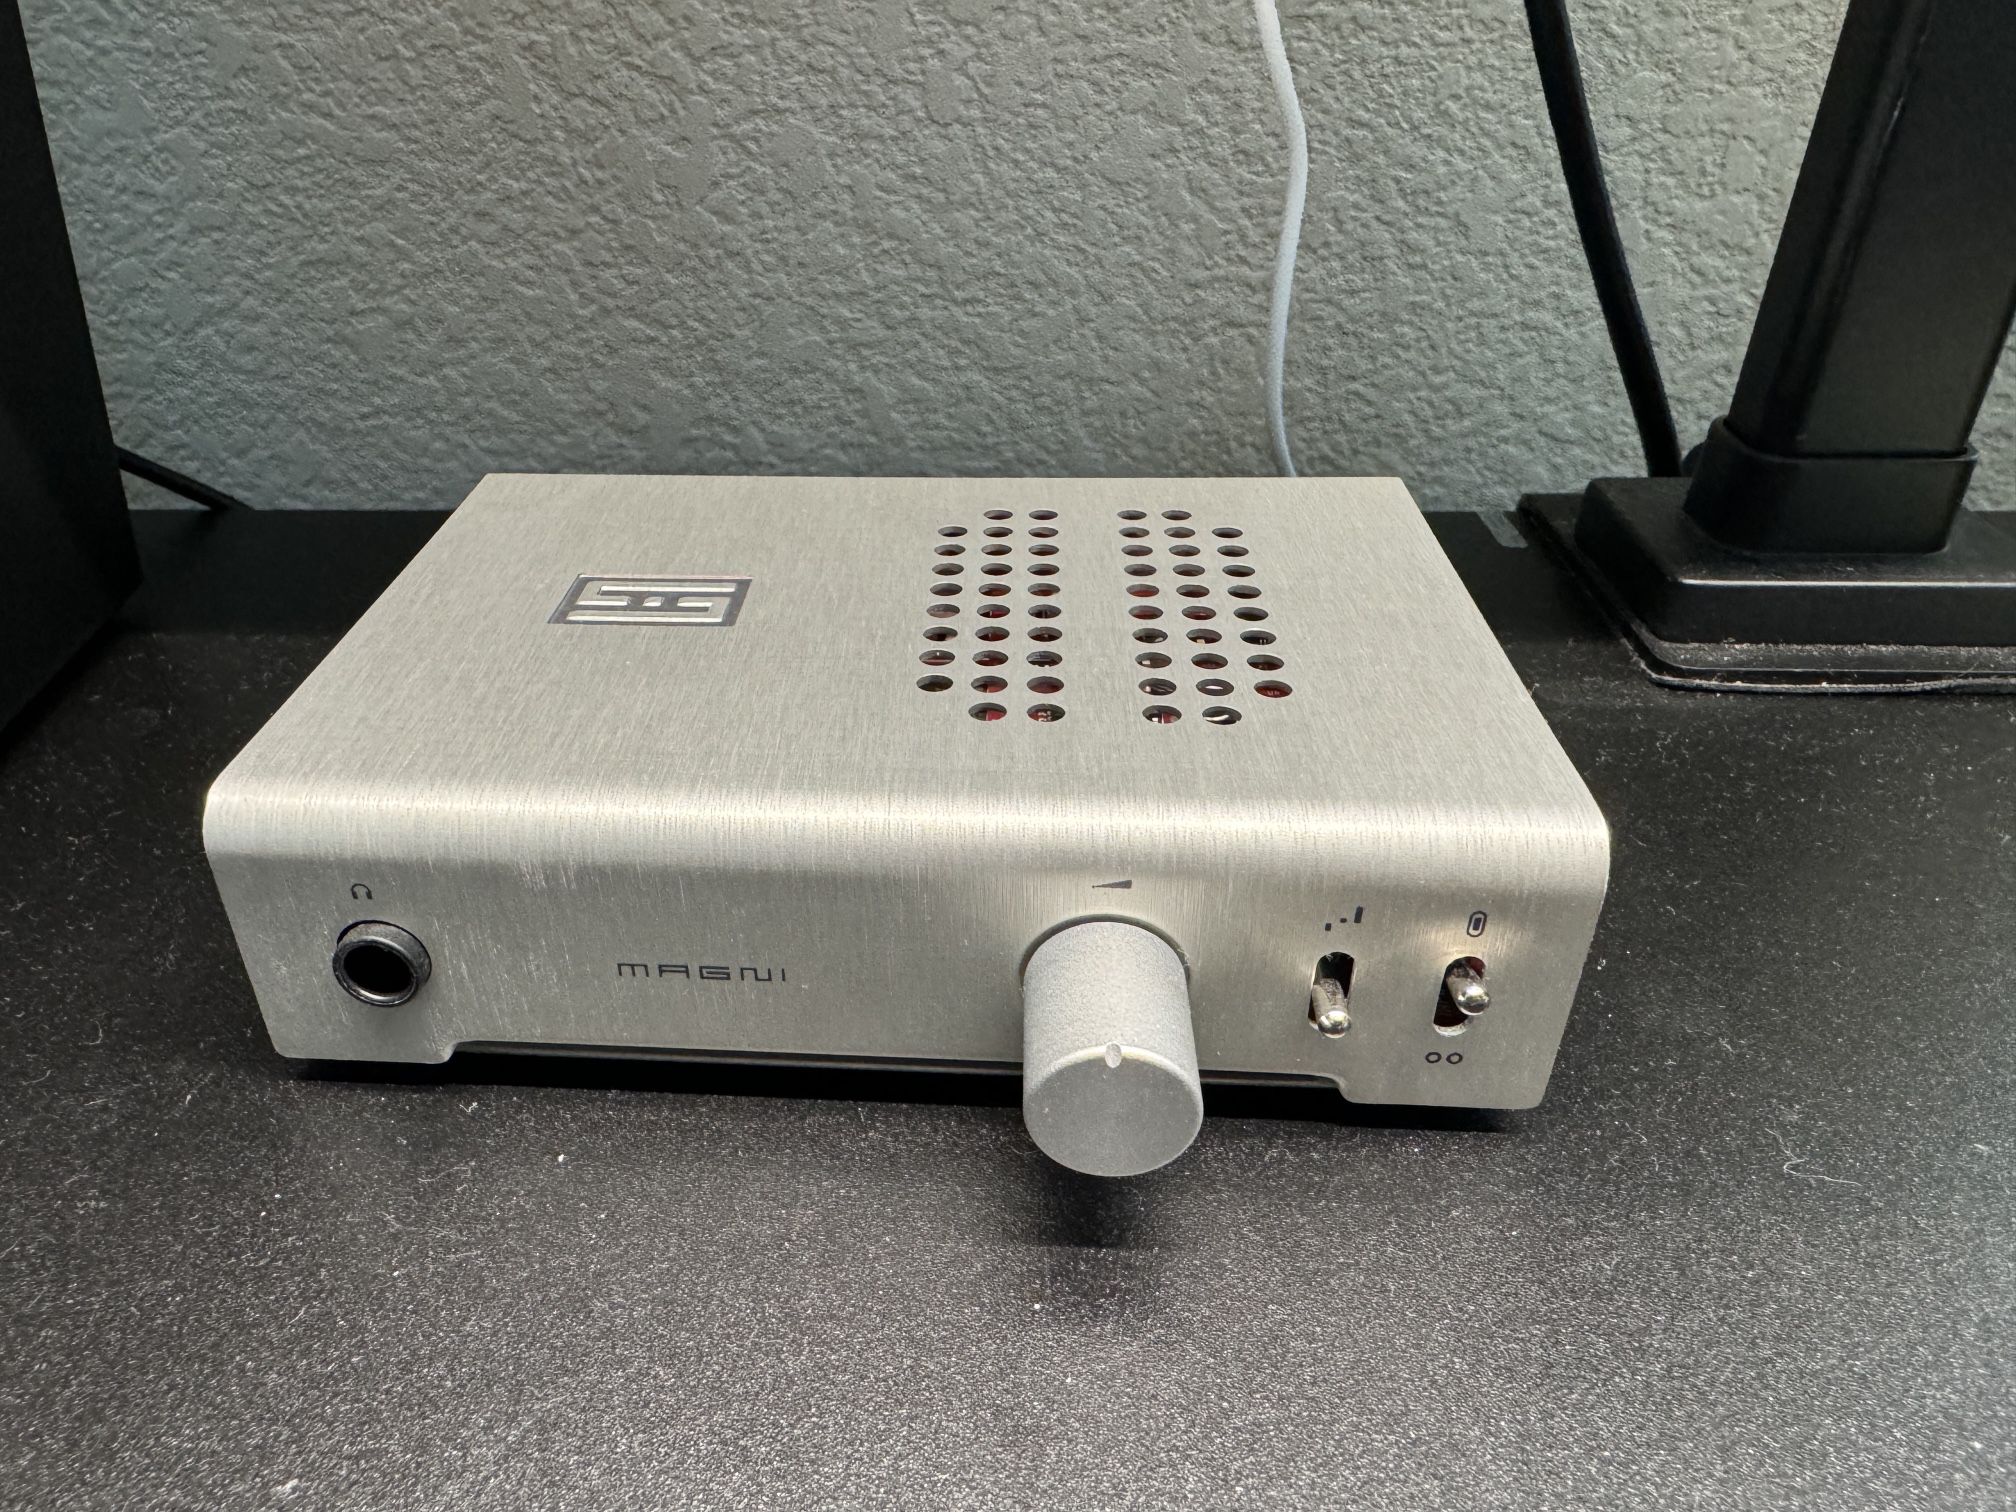 Schiit Magni Unity Headphone Amplifier and DAC